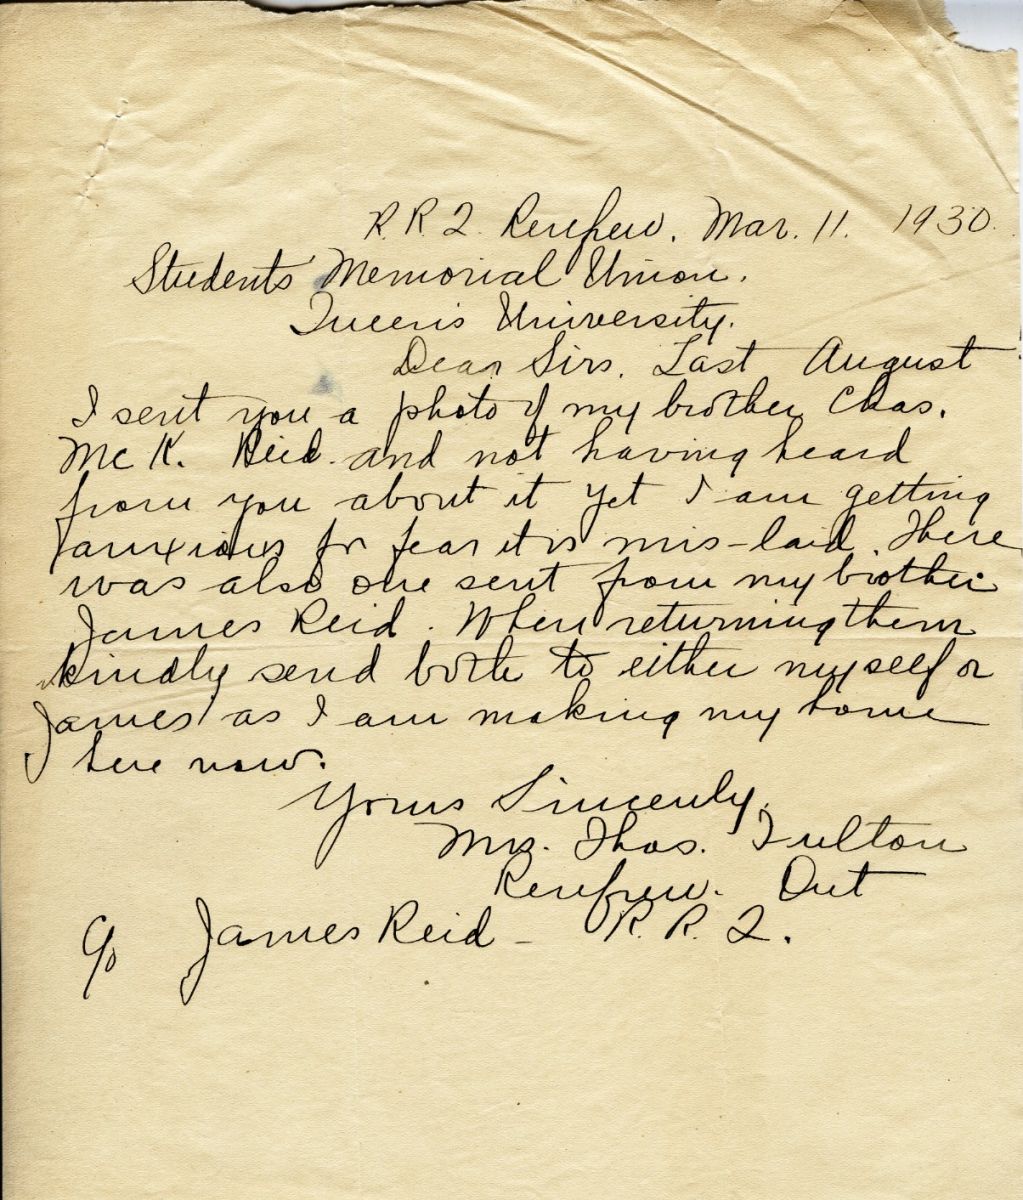 Letter from Mrs. Thos Fulton to Queen's University, 11th March 1930